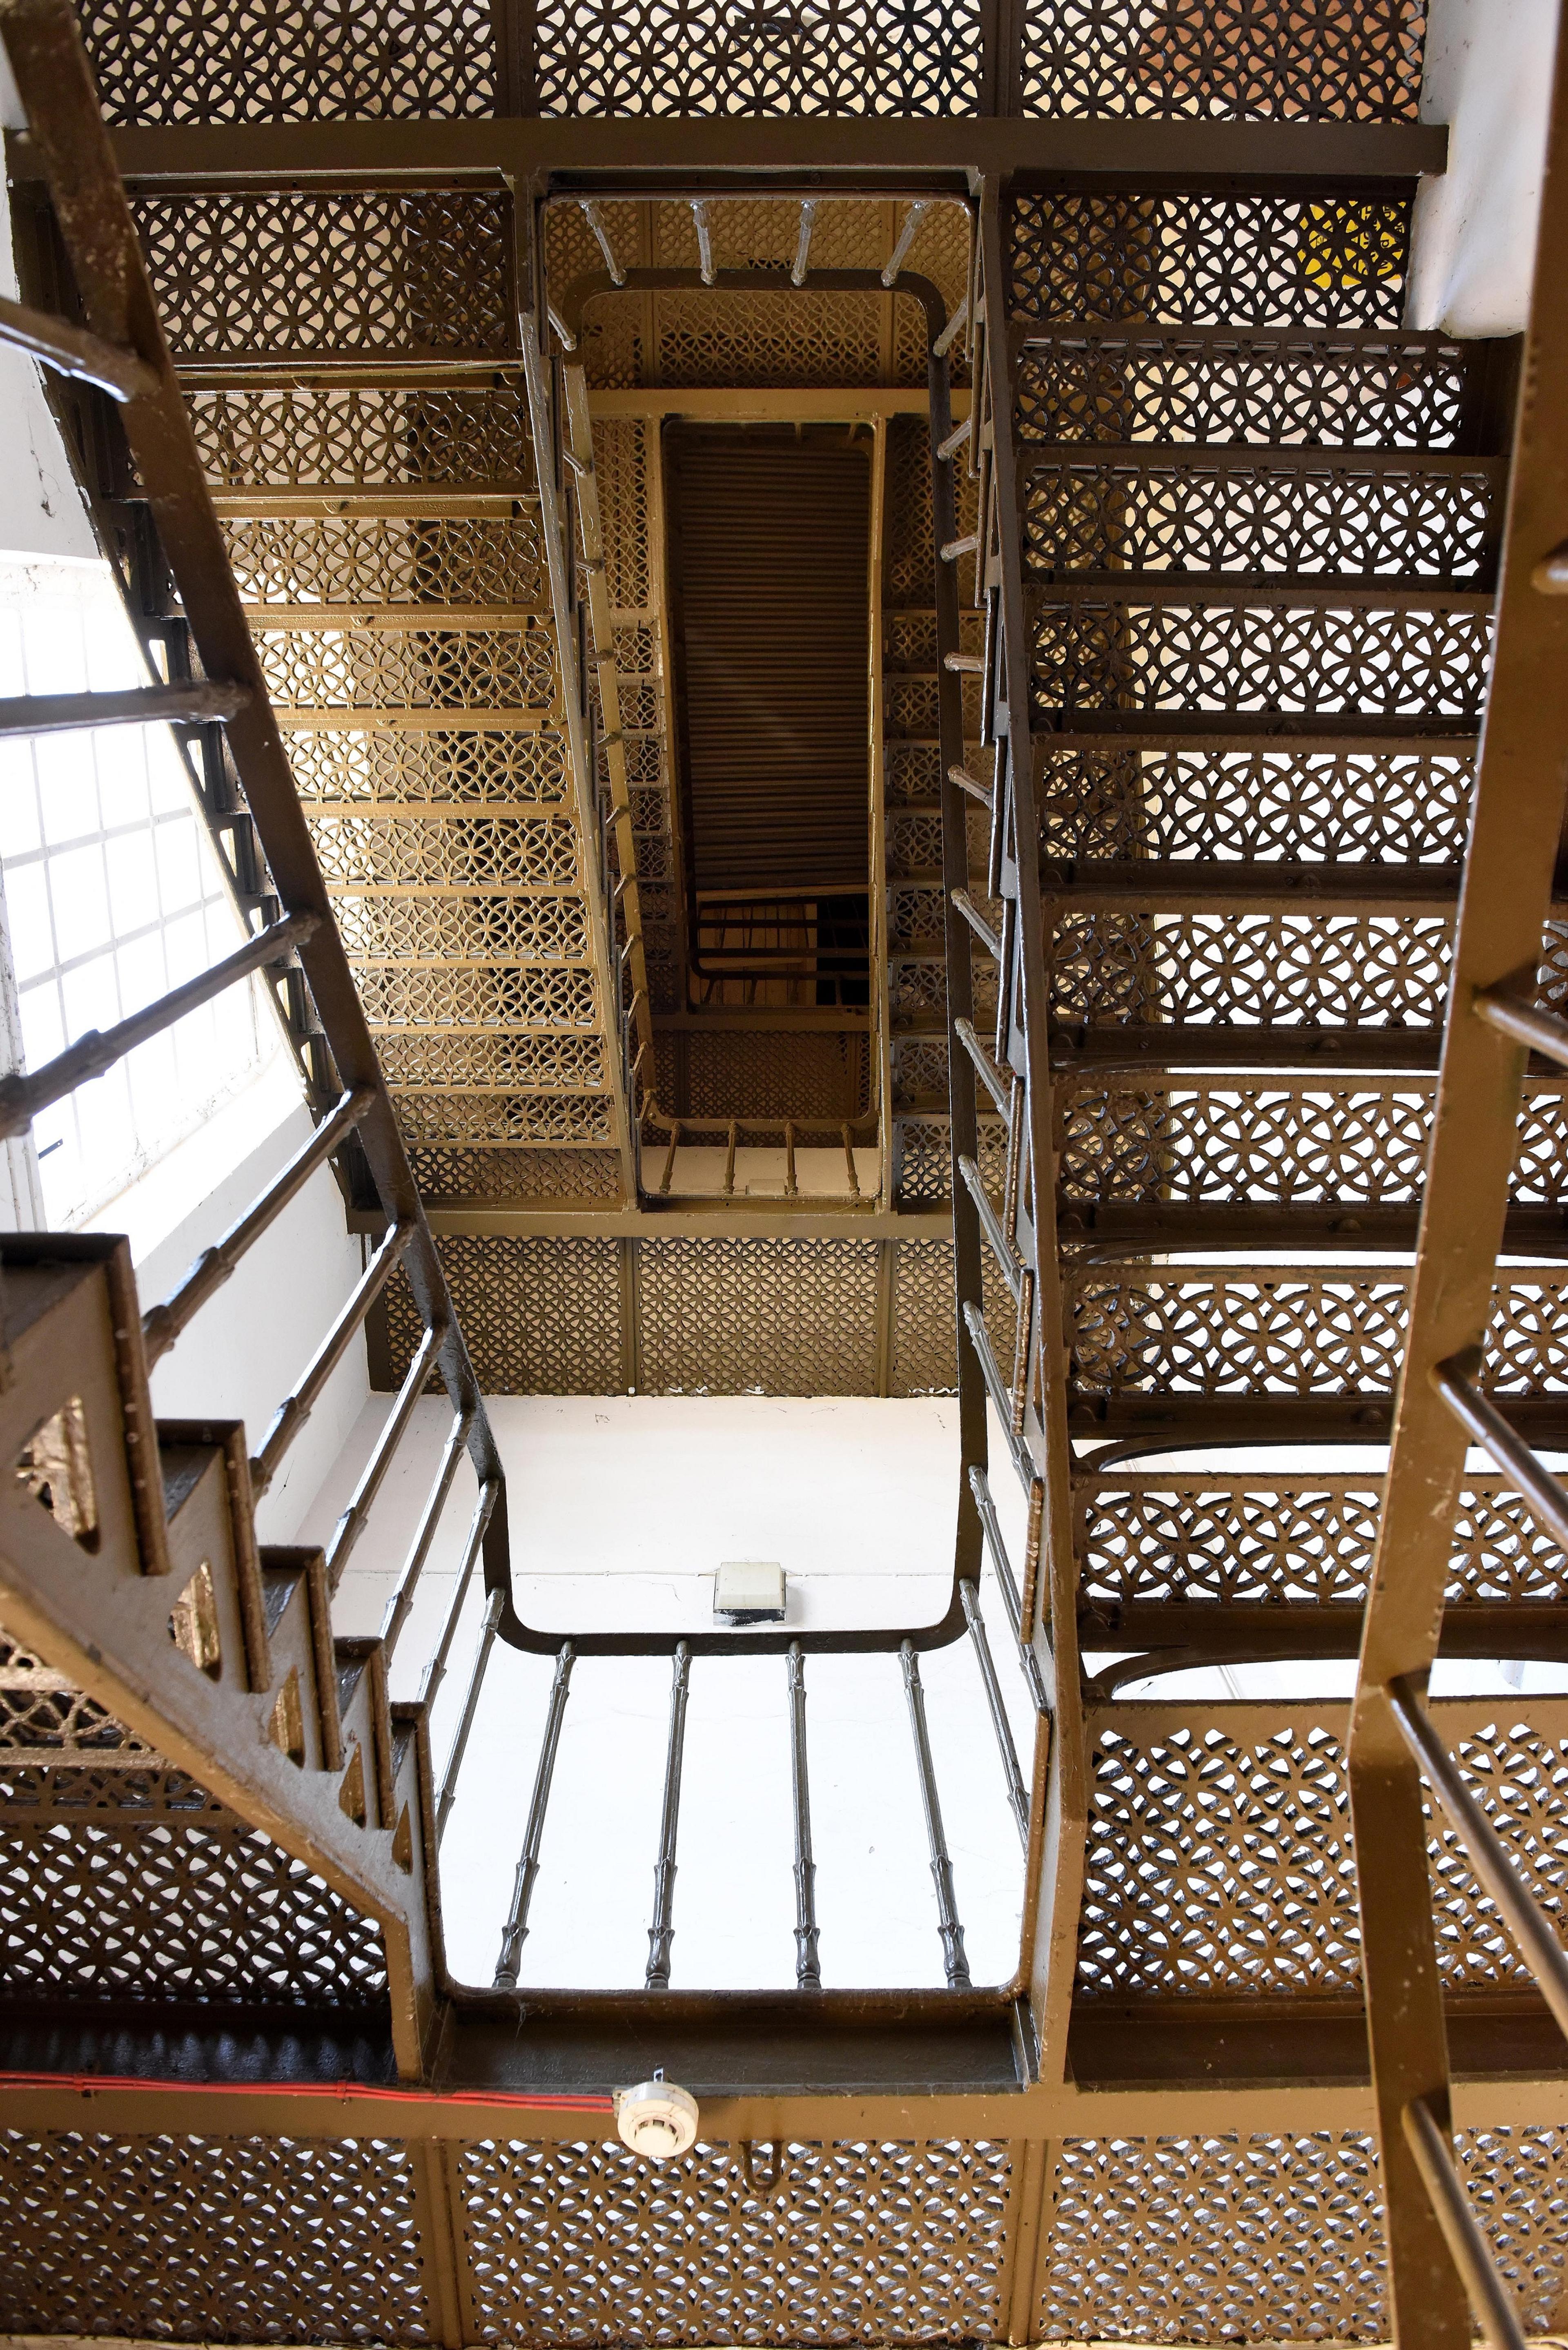 Photograph of decorative metal staircase seen from below